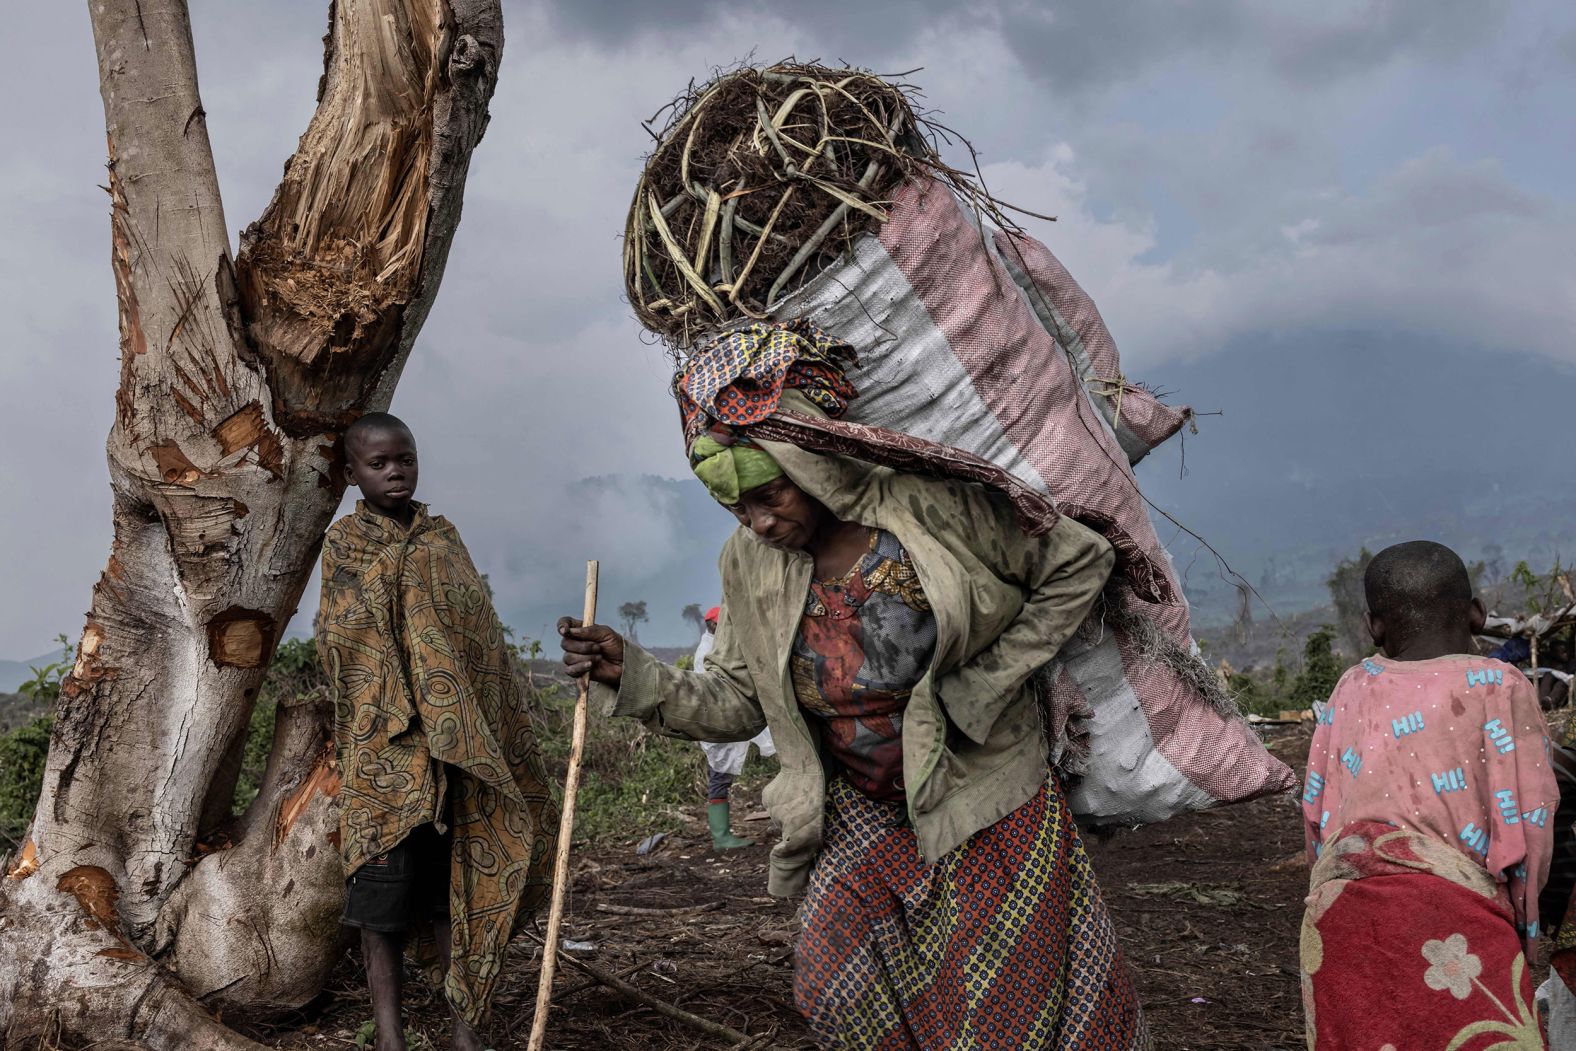 Internally displaced people carry charcoal harvested from a forest at the foot of Mount Nyiragongo in the Democratic Republic of Congo to sell at a market in Kibati on Friday, January 13.